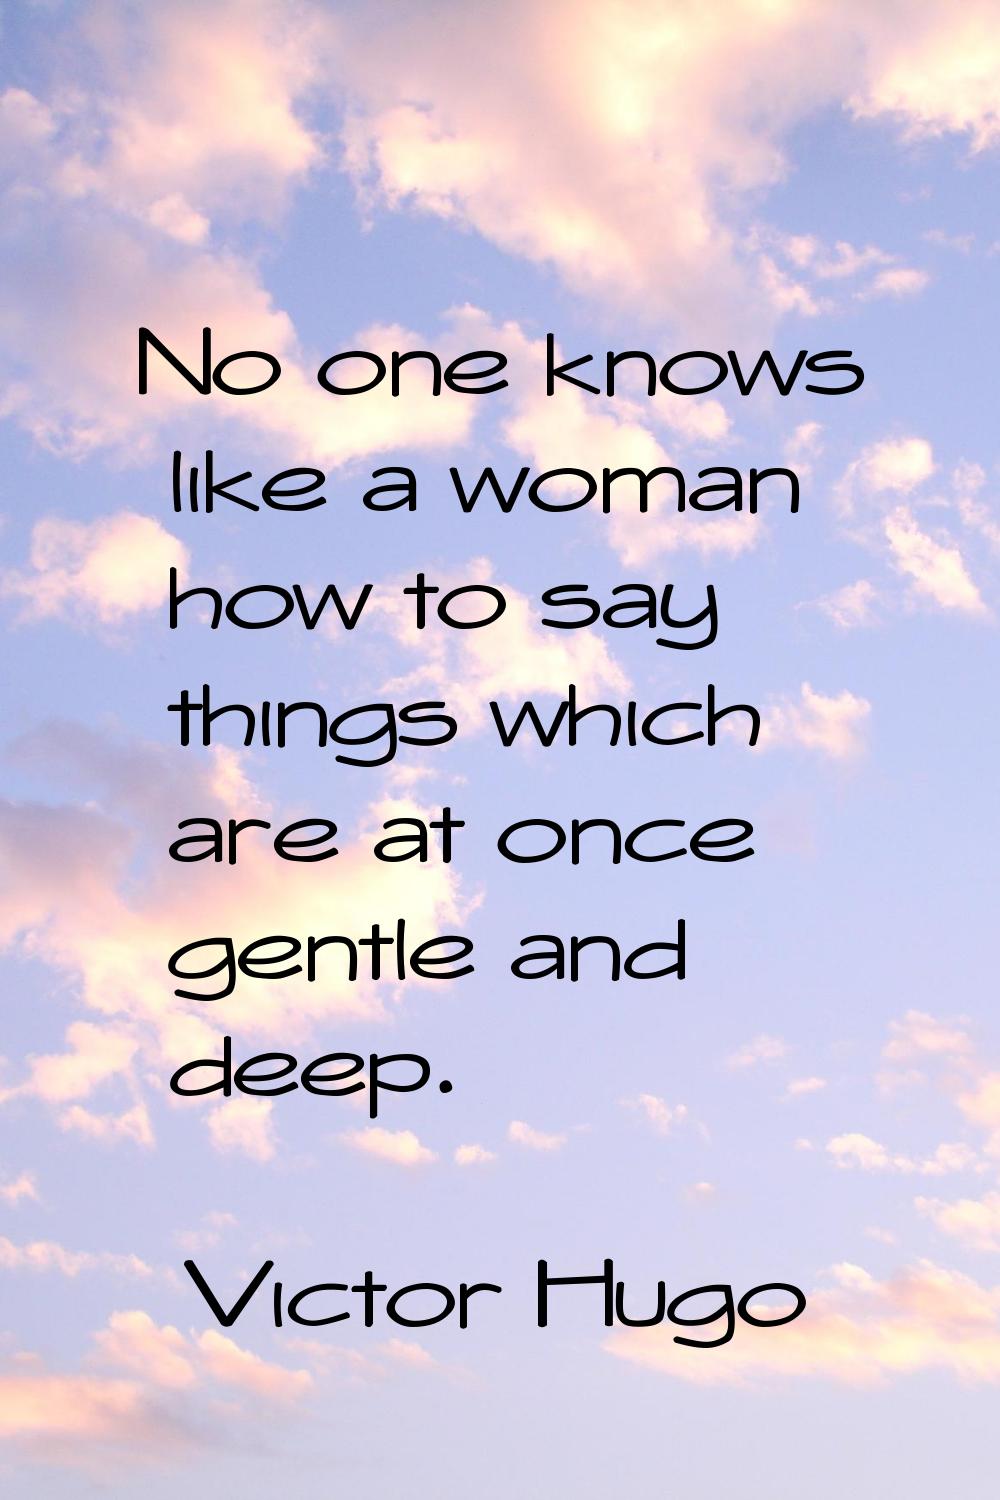 No one knows like a woman how to say things which are at once gentle and deep.